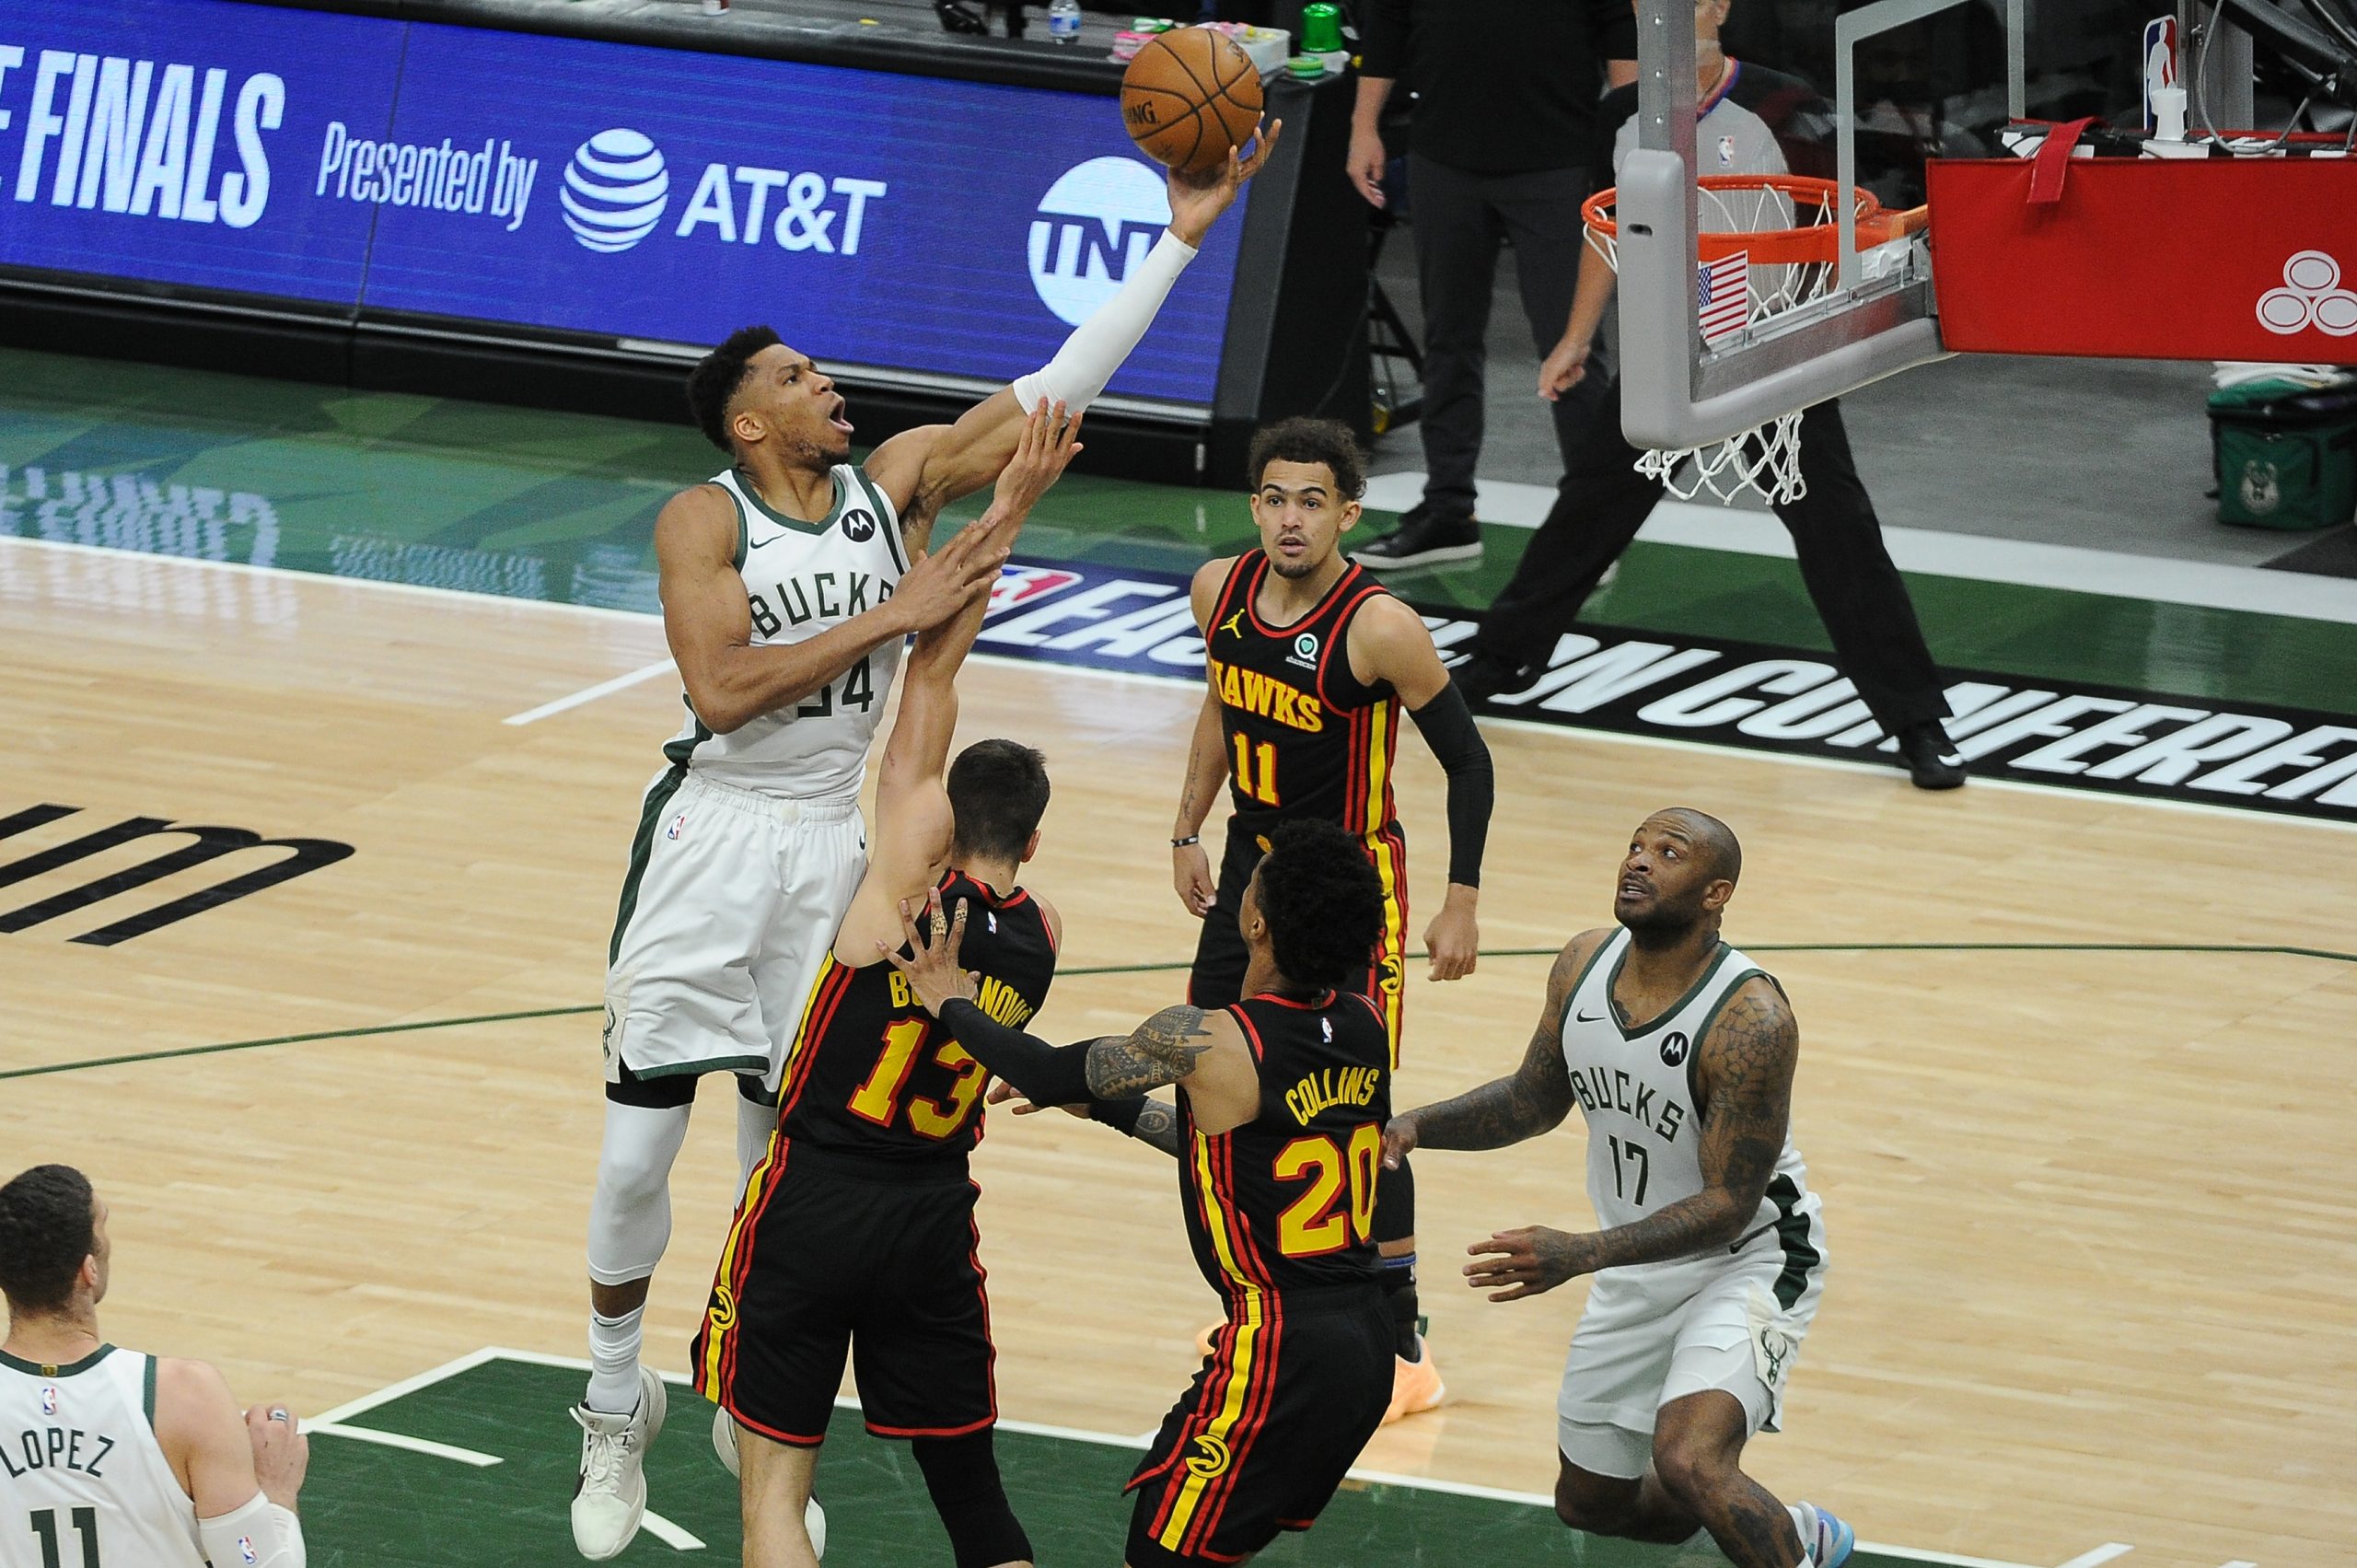 Milwaukee Bucks forward Giannis Antetokounmpo (34) shoots the ball over Atlanta Hawks guard Bogdan Bogdanovic (13) in the first quarter during game two of the Eastern Conference Finals for the 2021 NBA Playoffs at Fiserv Forum